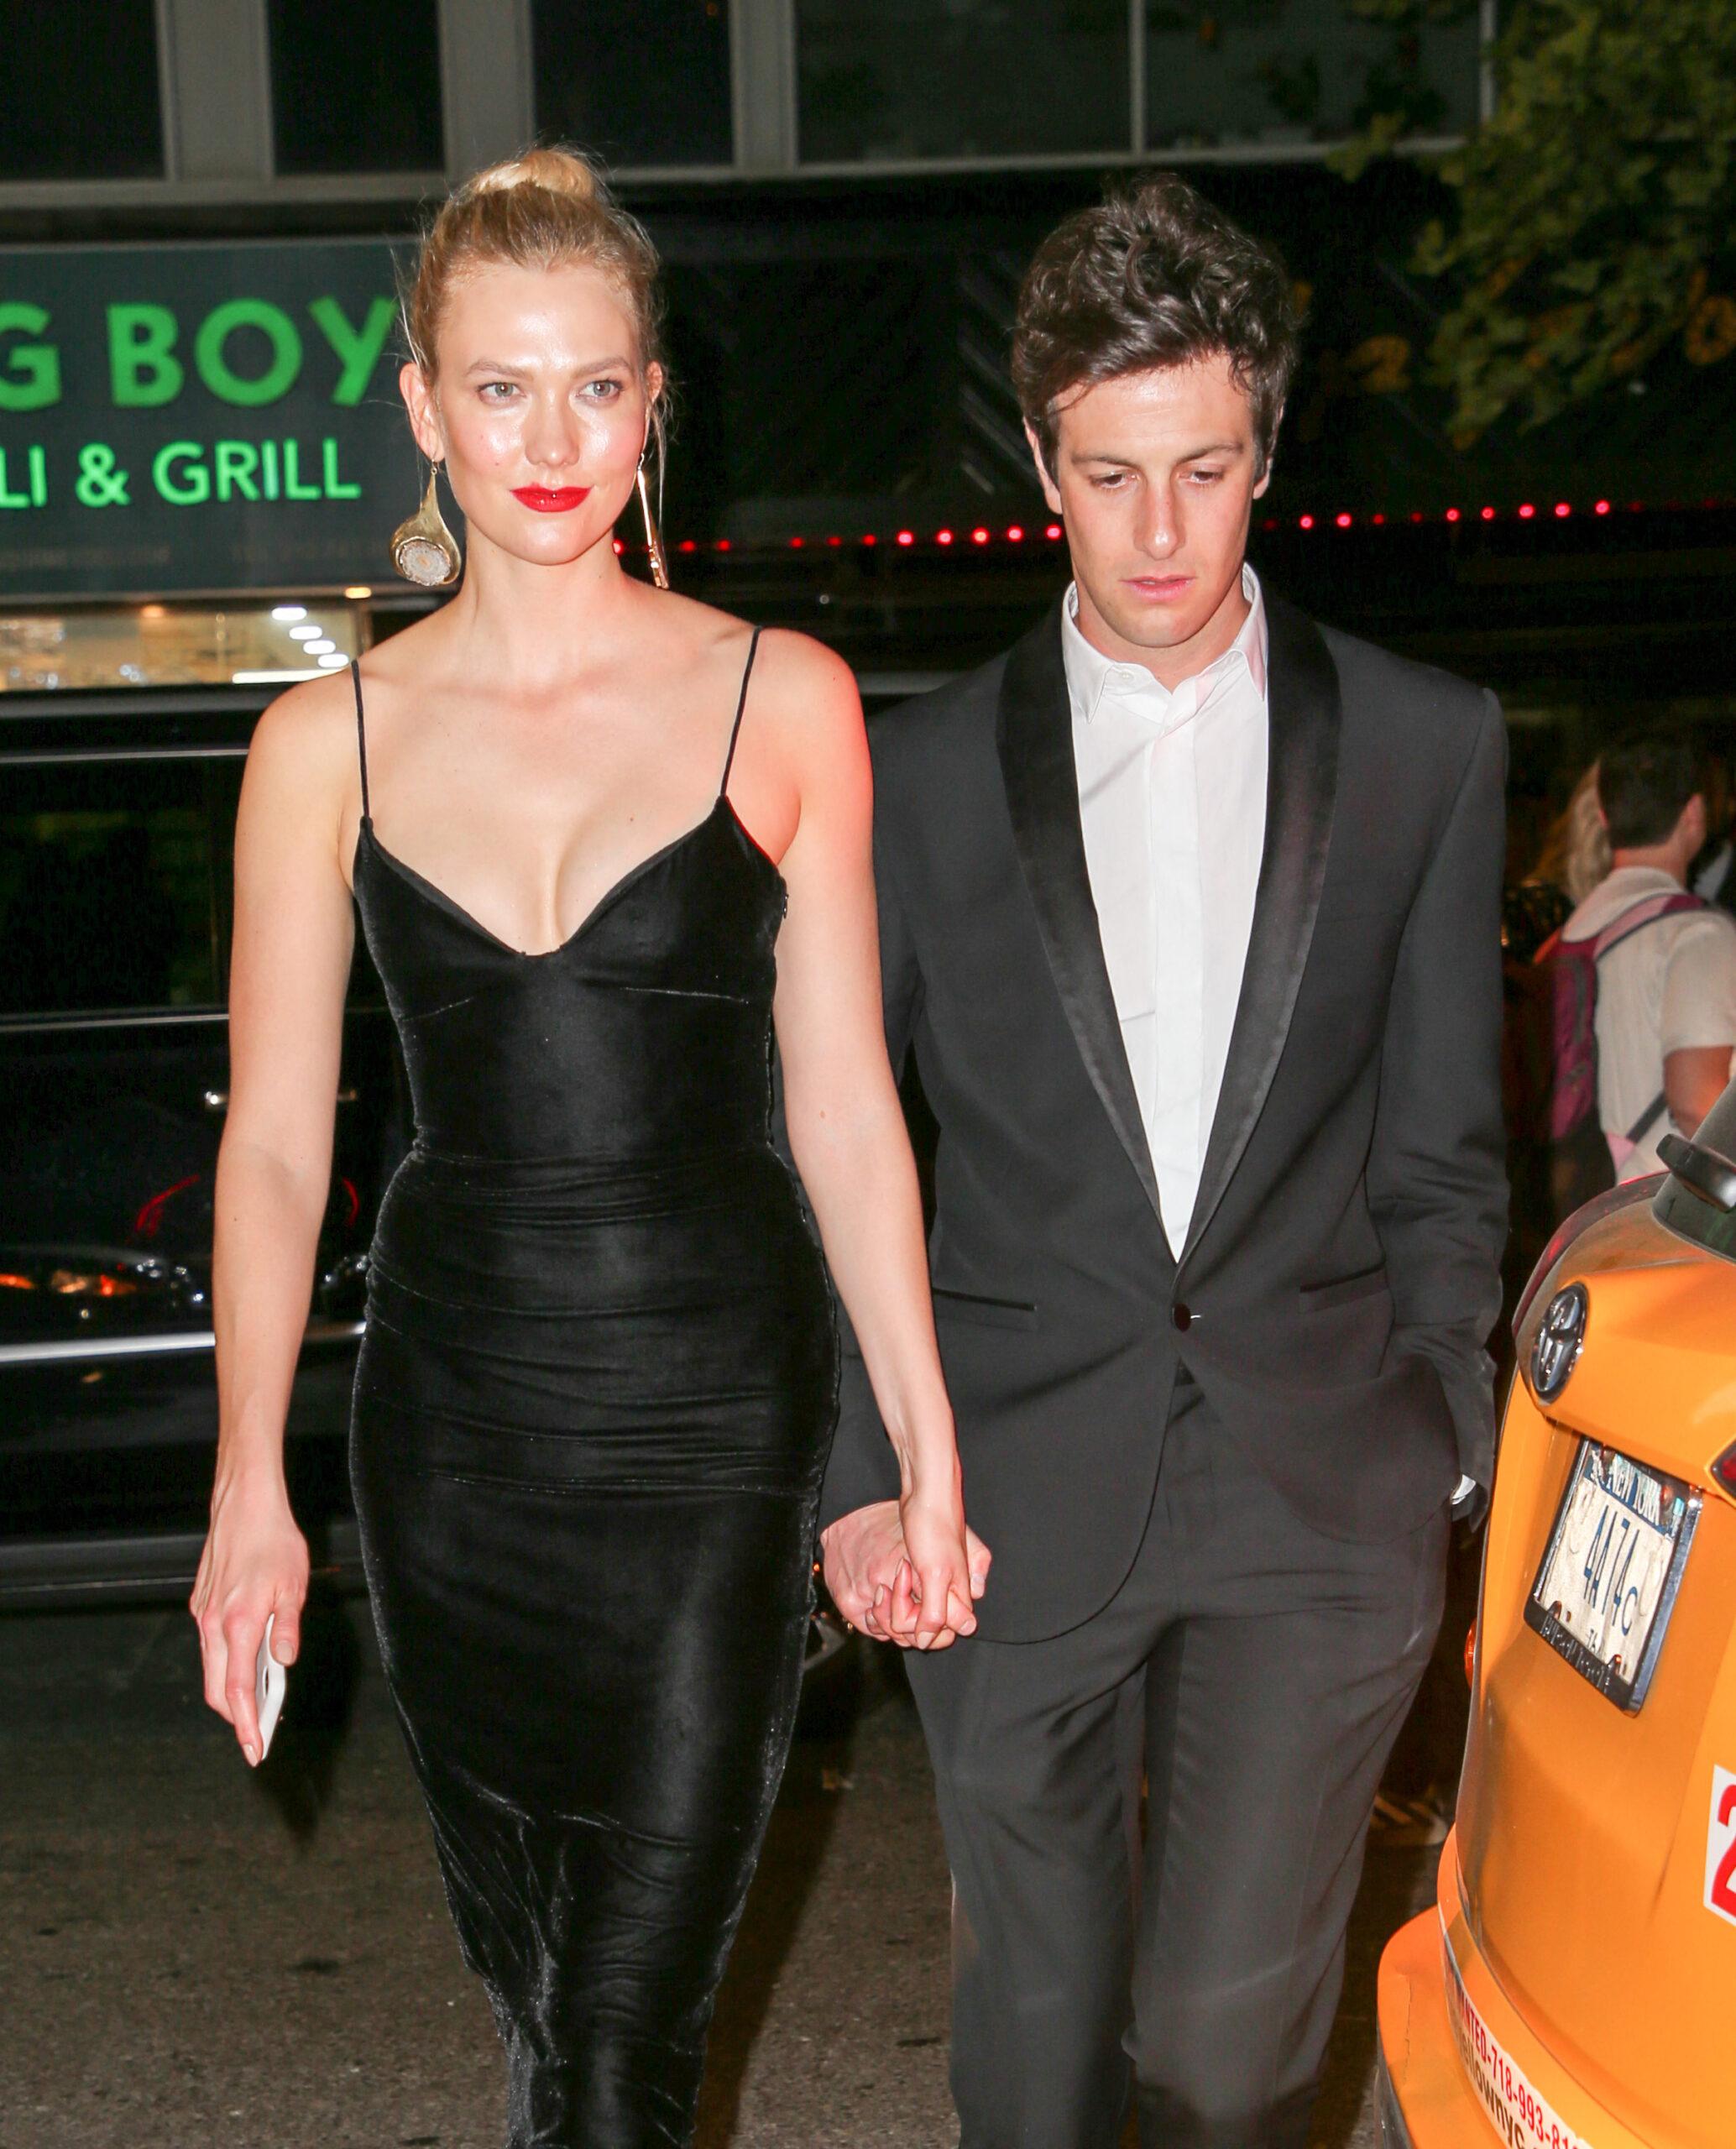 Karlie Kloss and husband Joshua Kushner seen hand-in-hand while arriving at the Met Gala 2018 after party in NYC